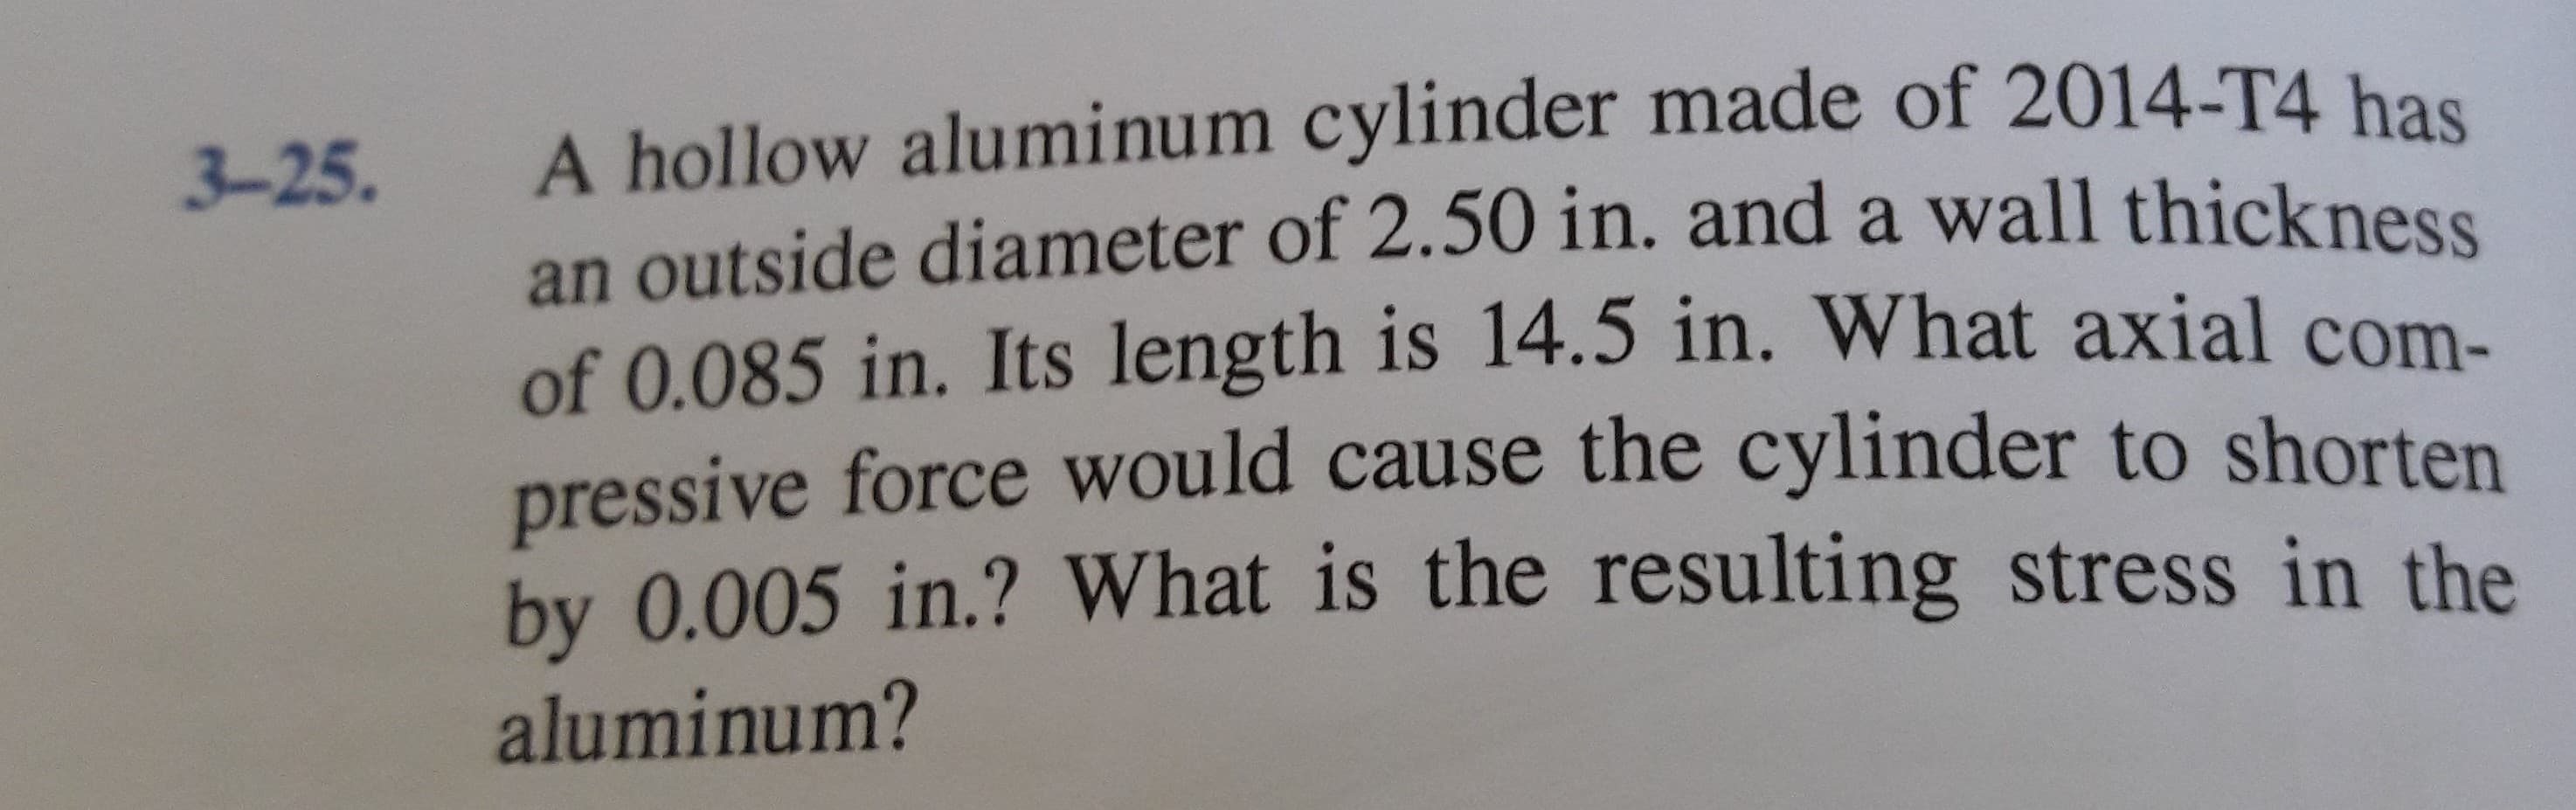 A hollow aluminum cylinder made of 2014-T4 has
an outside diameter of 2.50 in. and a wall thickness
of 0.085 in. Its length is 14.5 in. What axial com-
pressive force would cause the cylinder to shorten
by 0.005 in.? What is the resulting stress in the
3-25.
aluminum?
